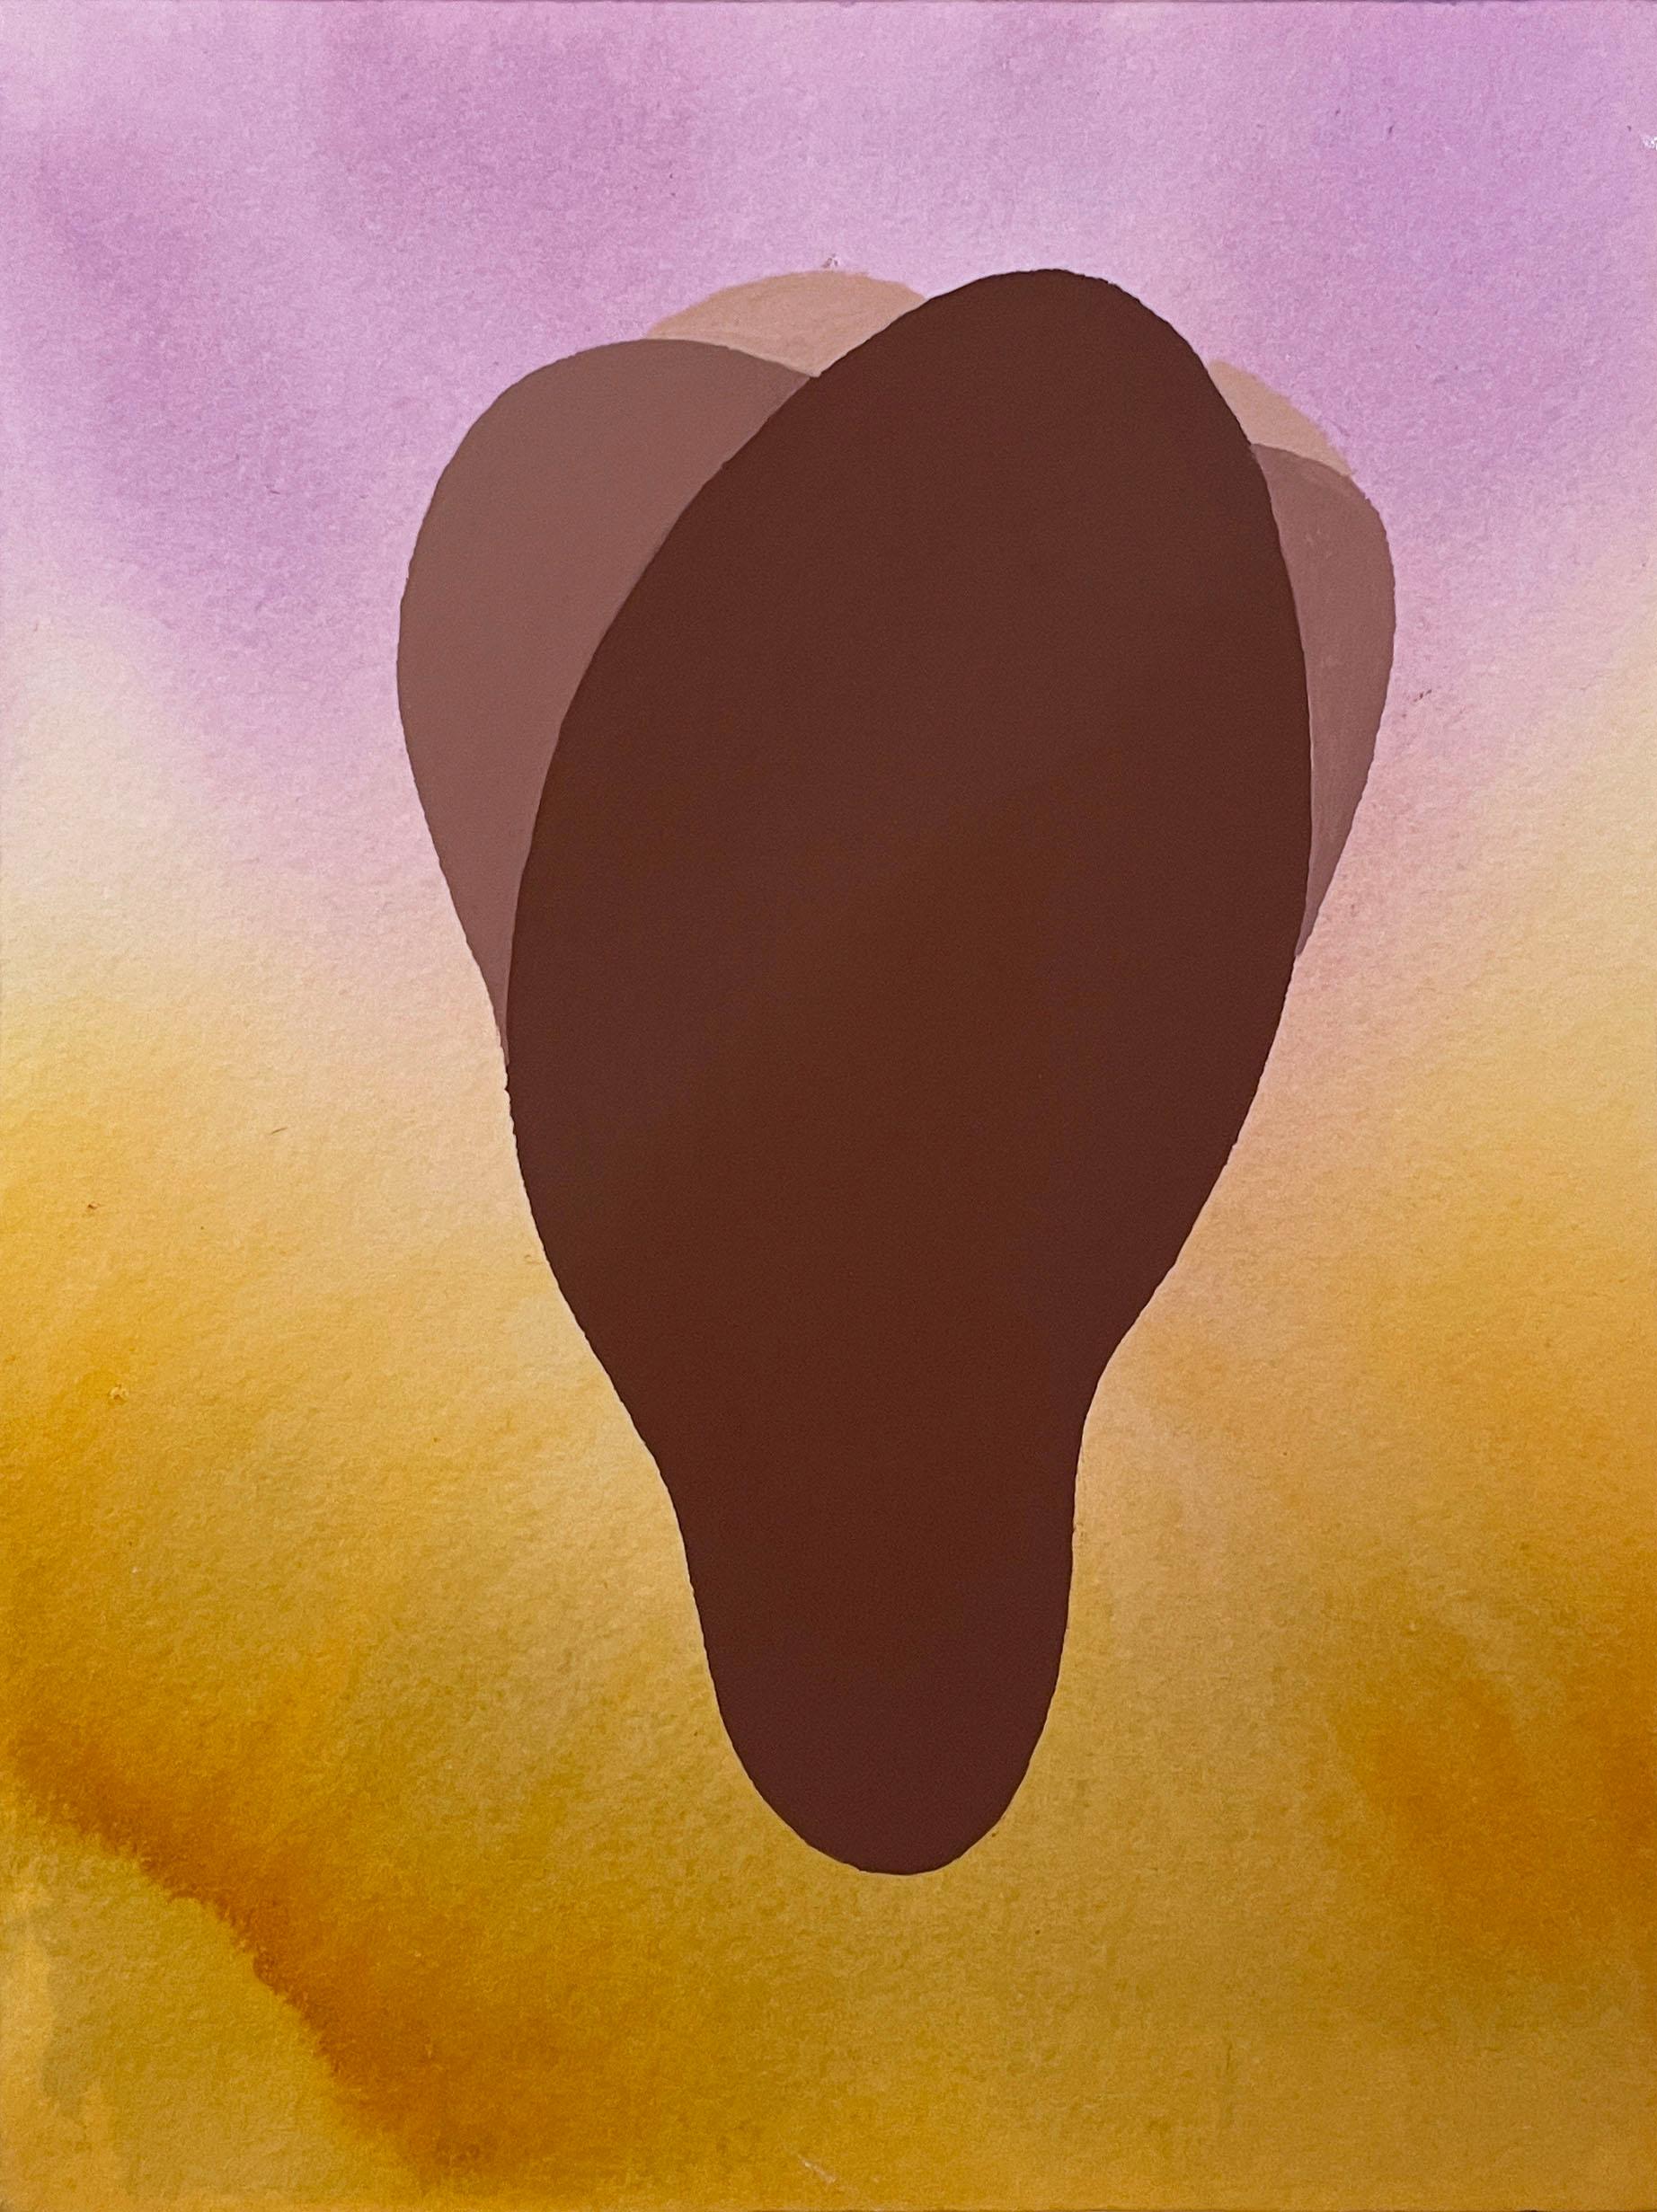 Bud (2022), gold & purple color gradient, flower petals, watercolor, matte - Orange Abstract Drawing by Shamona Stokes